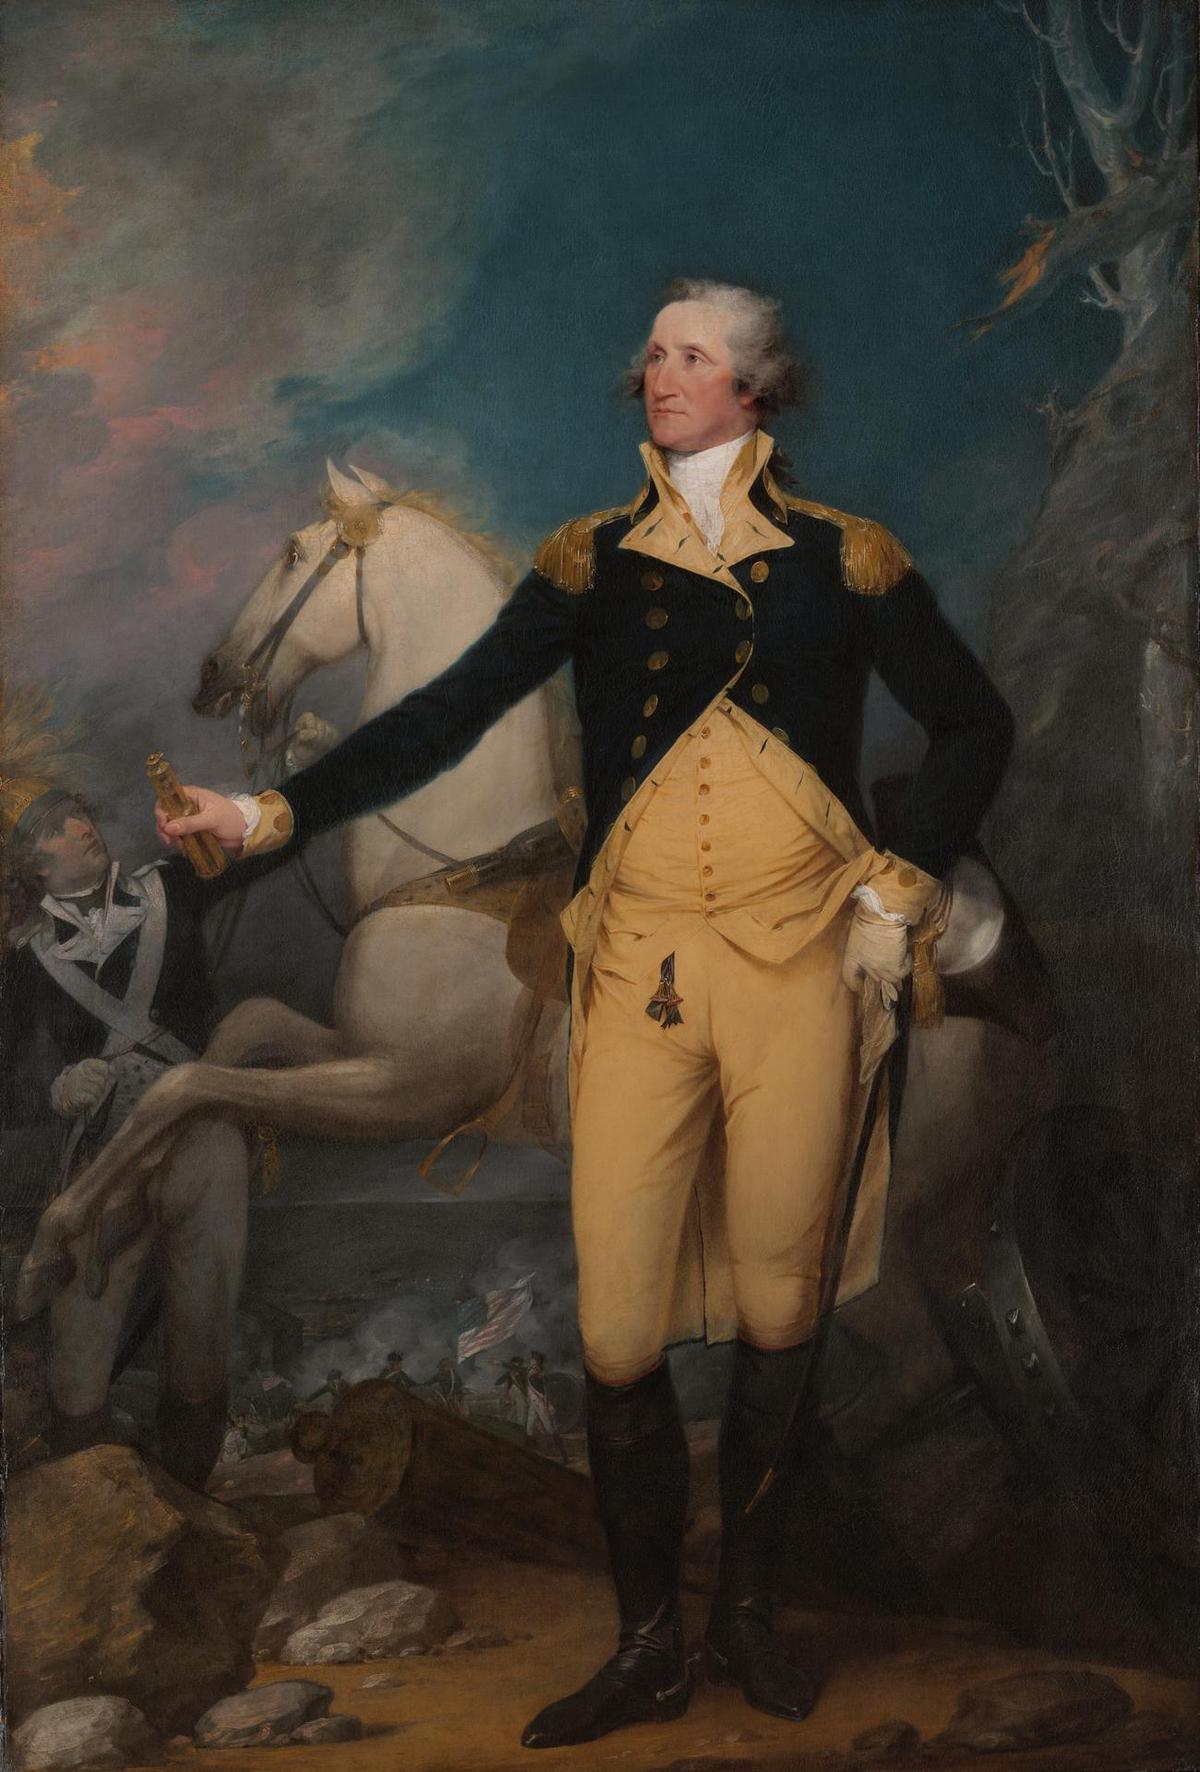 After Washington’s victory at Trenton, he was poised to become a Caesar. “General George Washington at Trenton,” 1792, by John Trumbull. Gift of the Society of the Cincinnati in Connecticut; Yale University. (Public Domain)